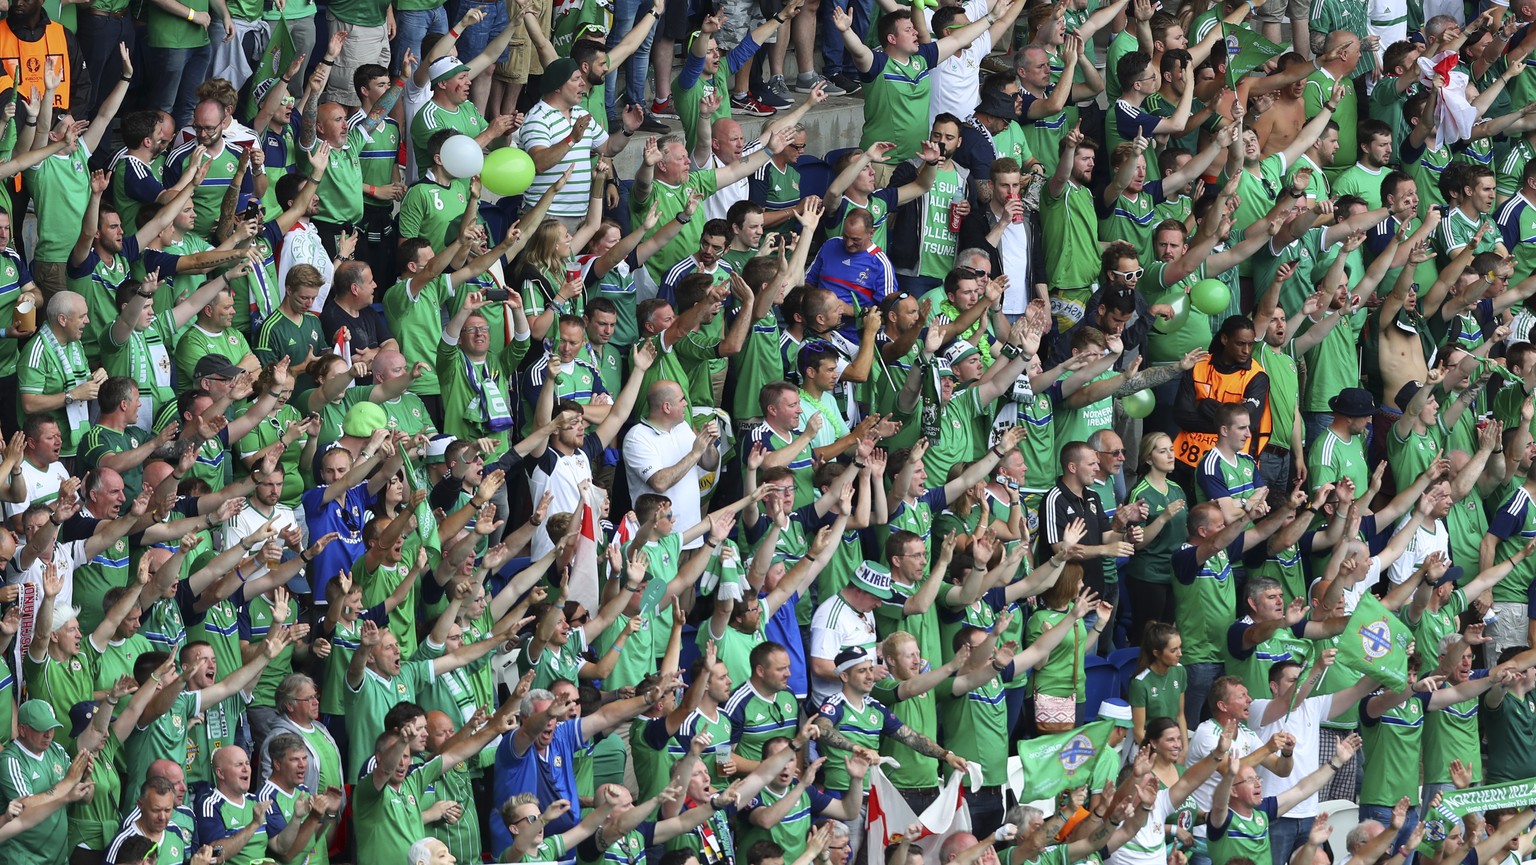 Northern Ireland supporters cheer prior to the Euro 2016 Group C soccer match between Northern Ireland and Germany at the Parc des Princes stadium in Paris, France, Tuesday, June 21, 2016. (AP Photo/T ...